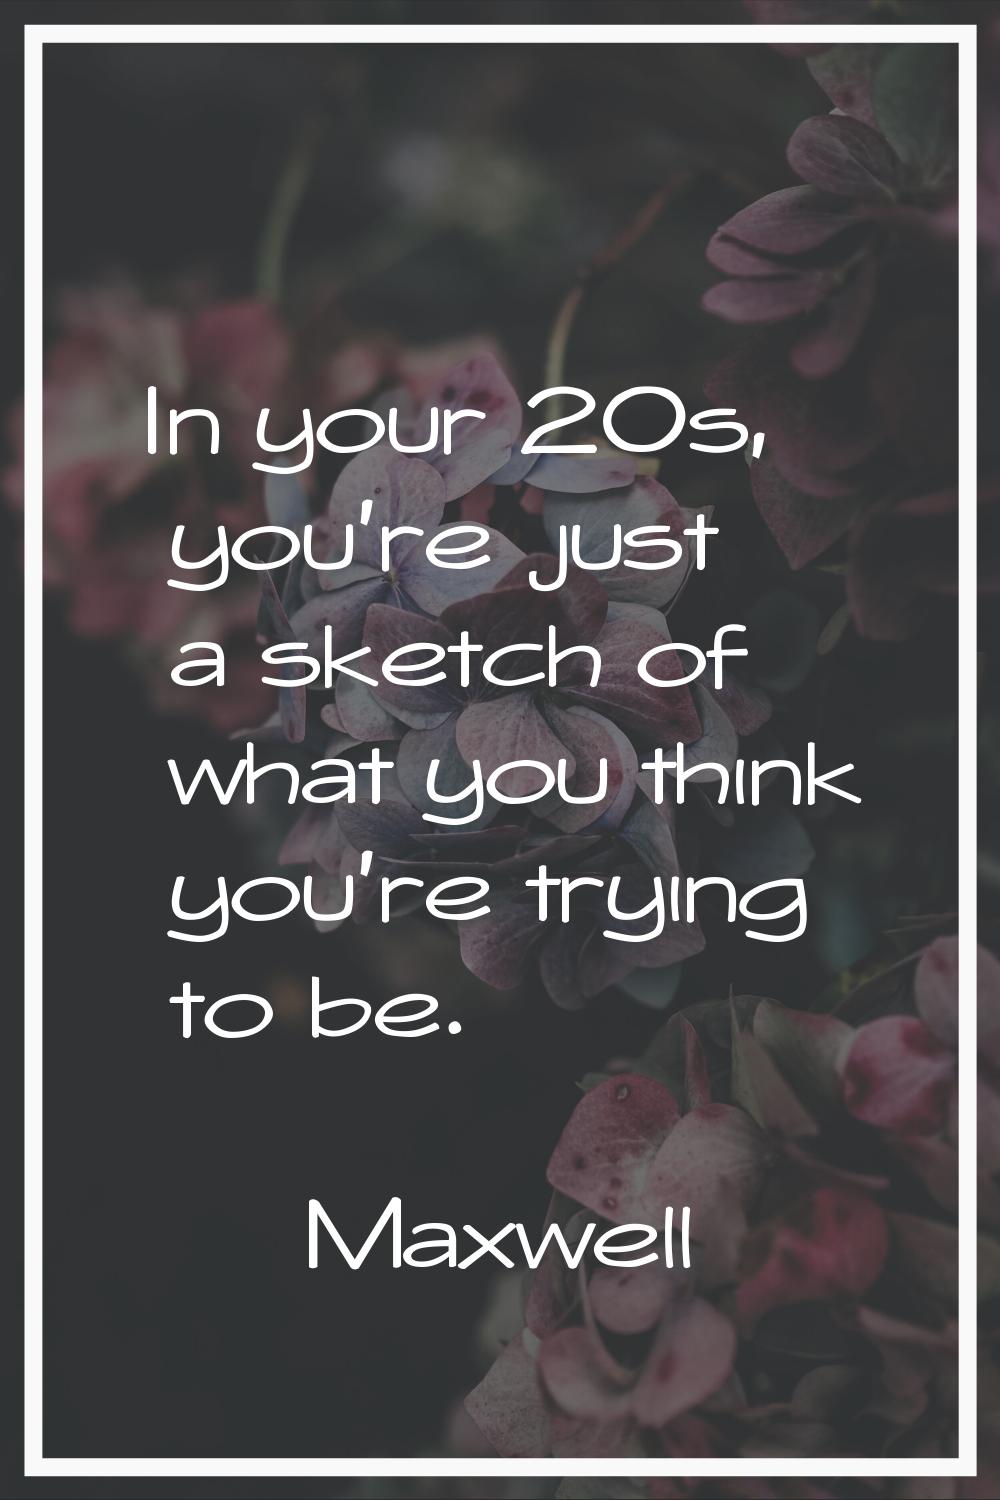 In your 20s, you're just a sketch of what you think you're trying to be.